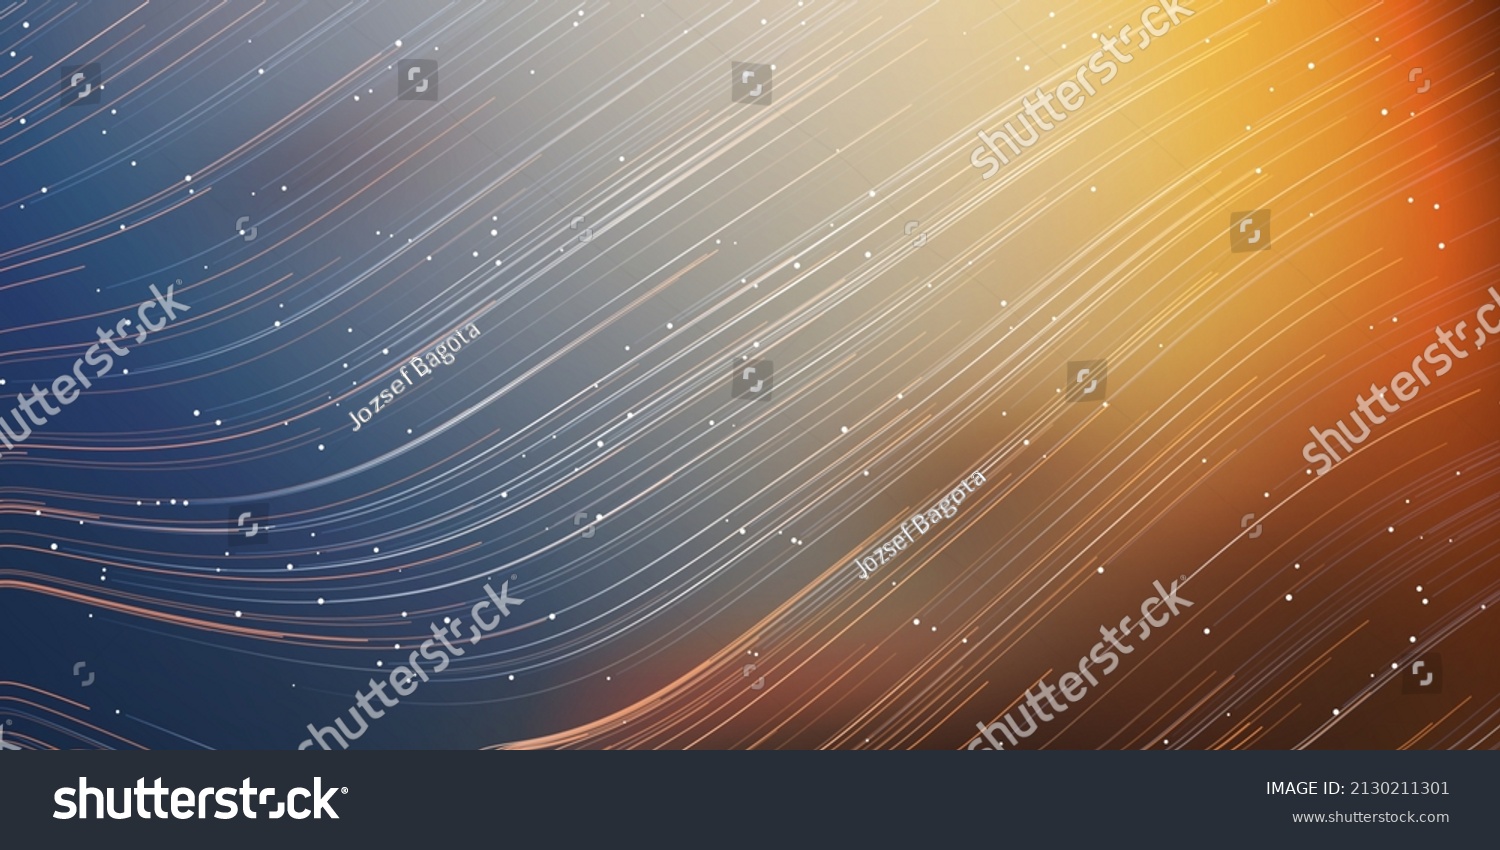 SVG of Curving,Flowing Energy Lines Pattern in Glowing Sunlit Space and Starry Sky Around - Modern Style Futuristic Technology or Astrology Concept Background, Generative Art, Creative Template,Vector Design svg